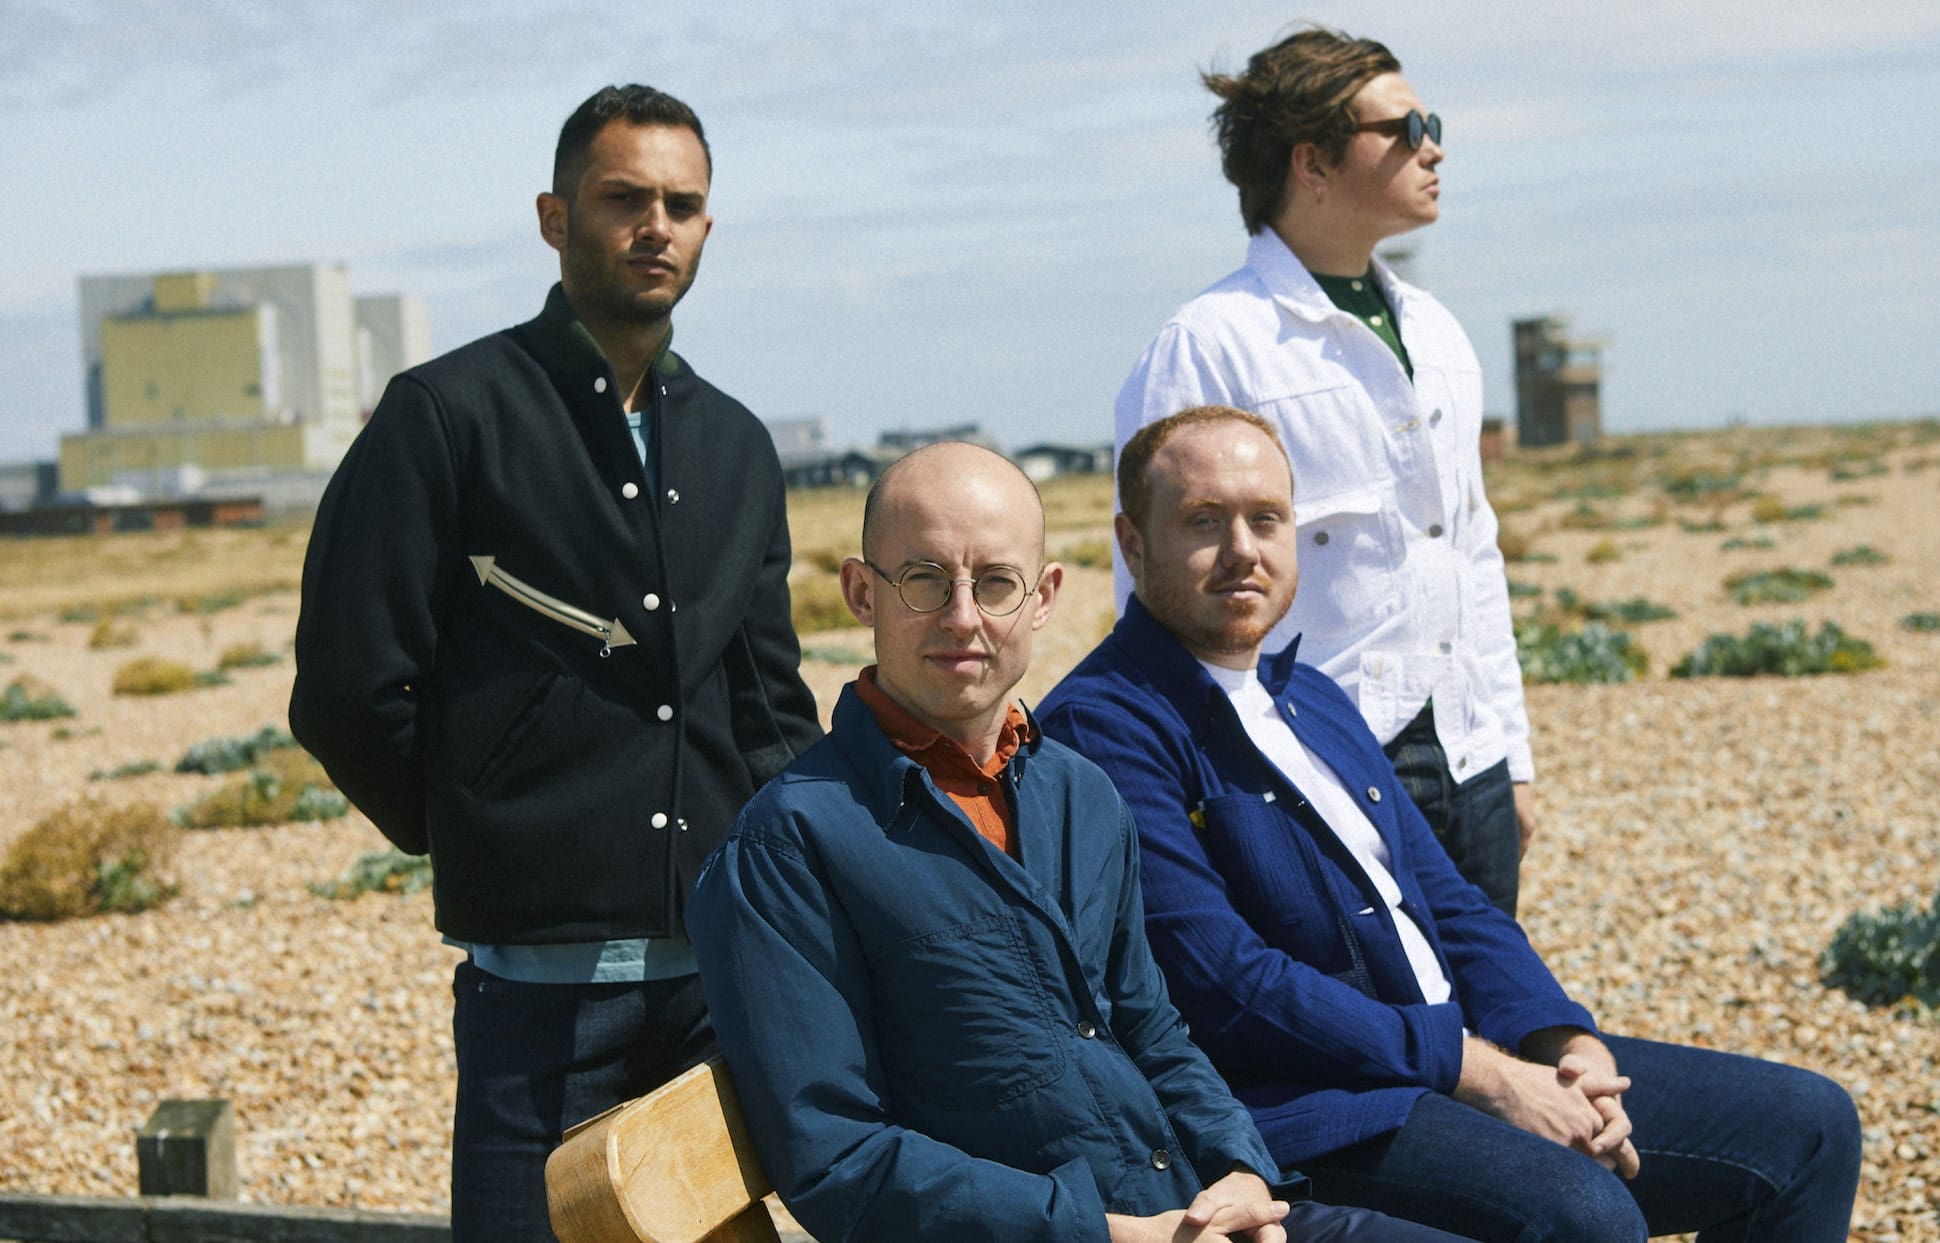 20-facts-about-bombay-bicycle-club